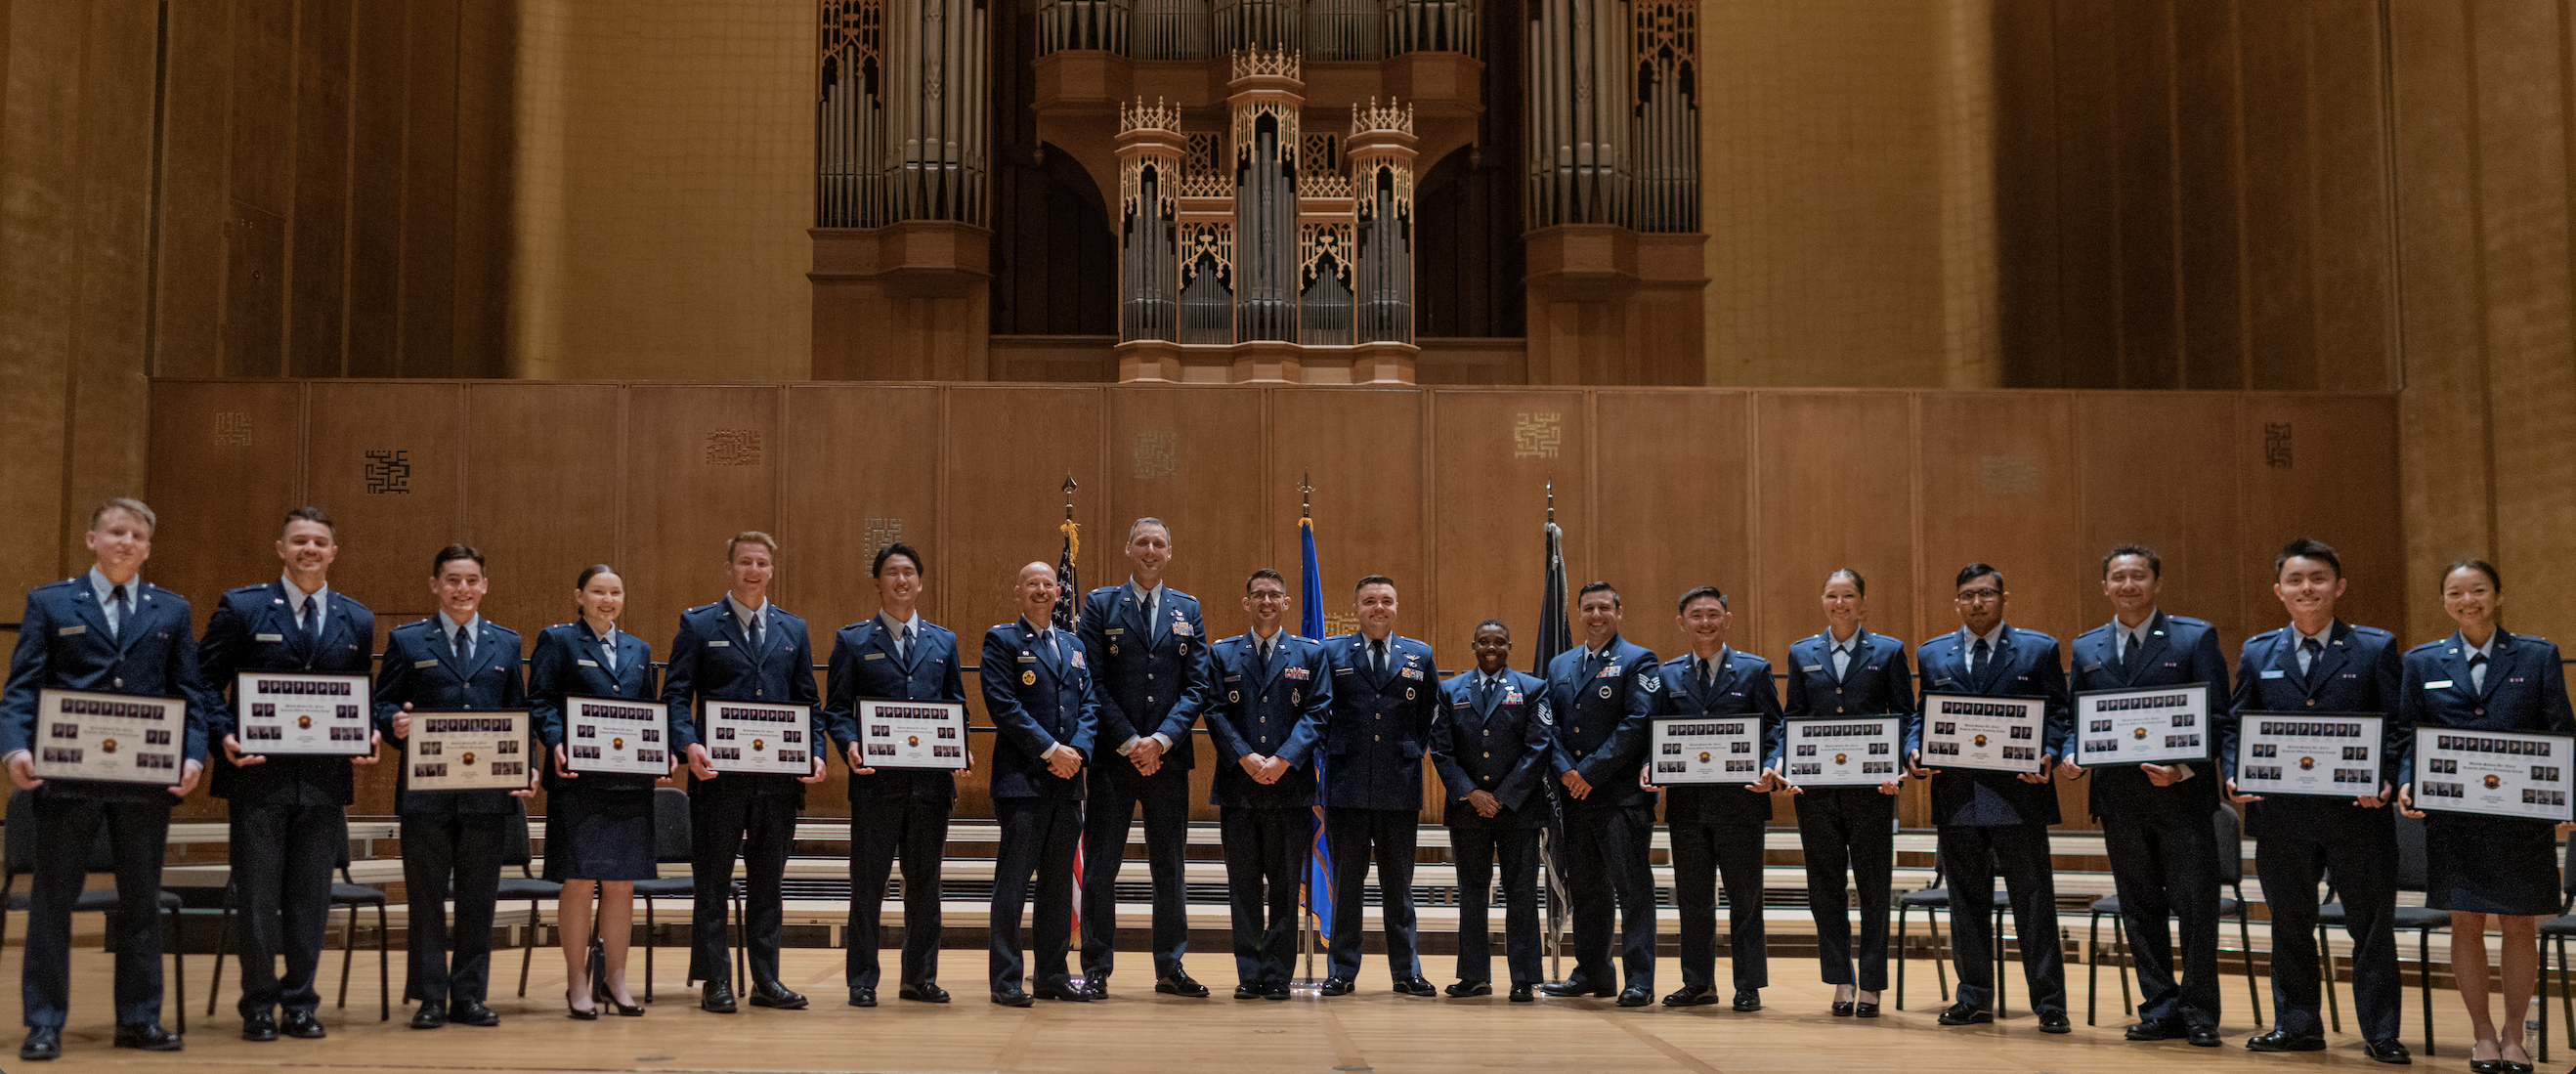 Group shot of cadets holding awards at a large venue